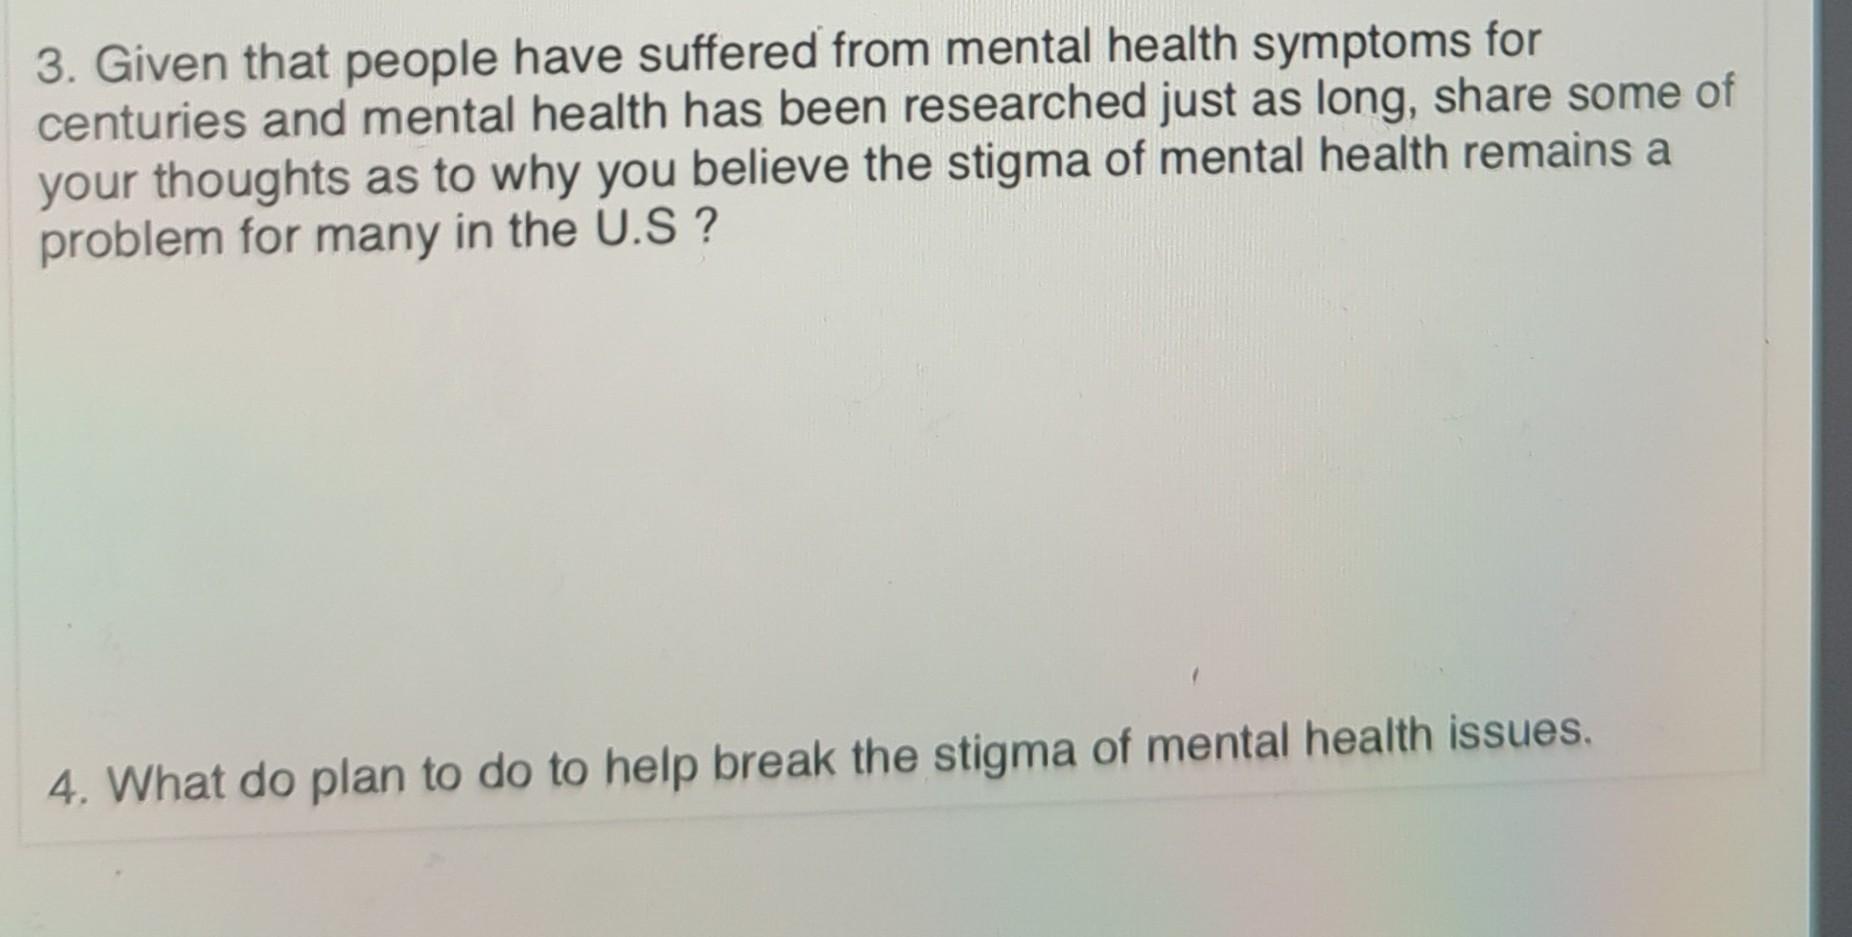 3. Given that people have suffered from mental health symptoms for
centuries and mental health has been researched just as lo